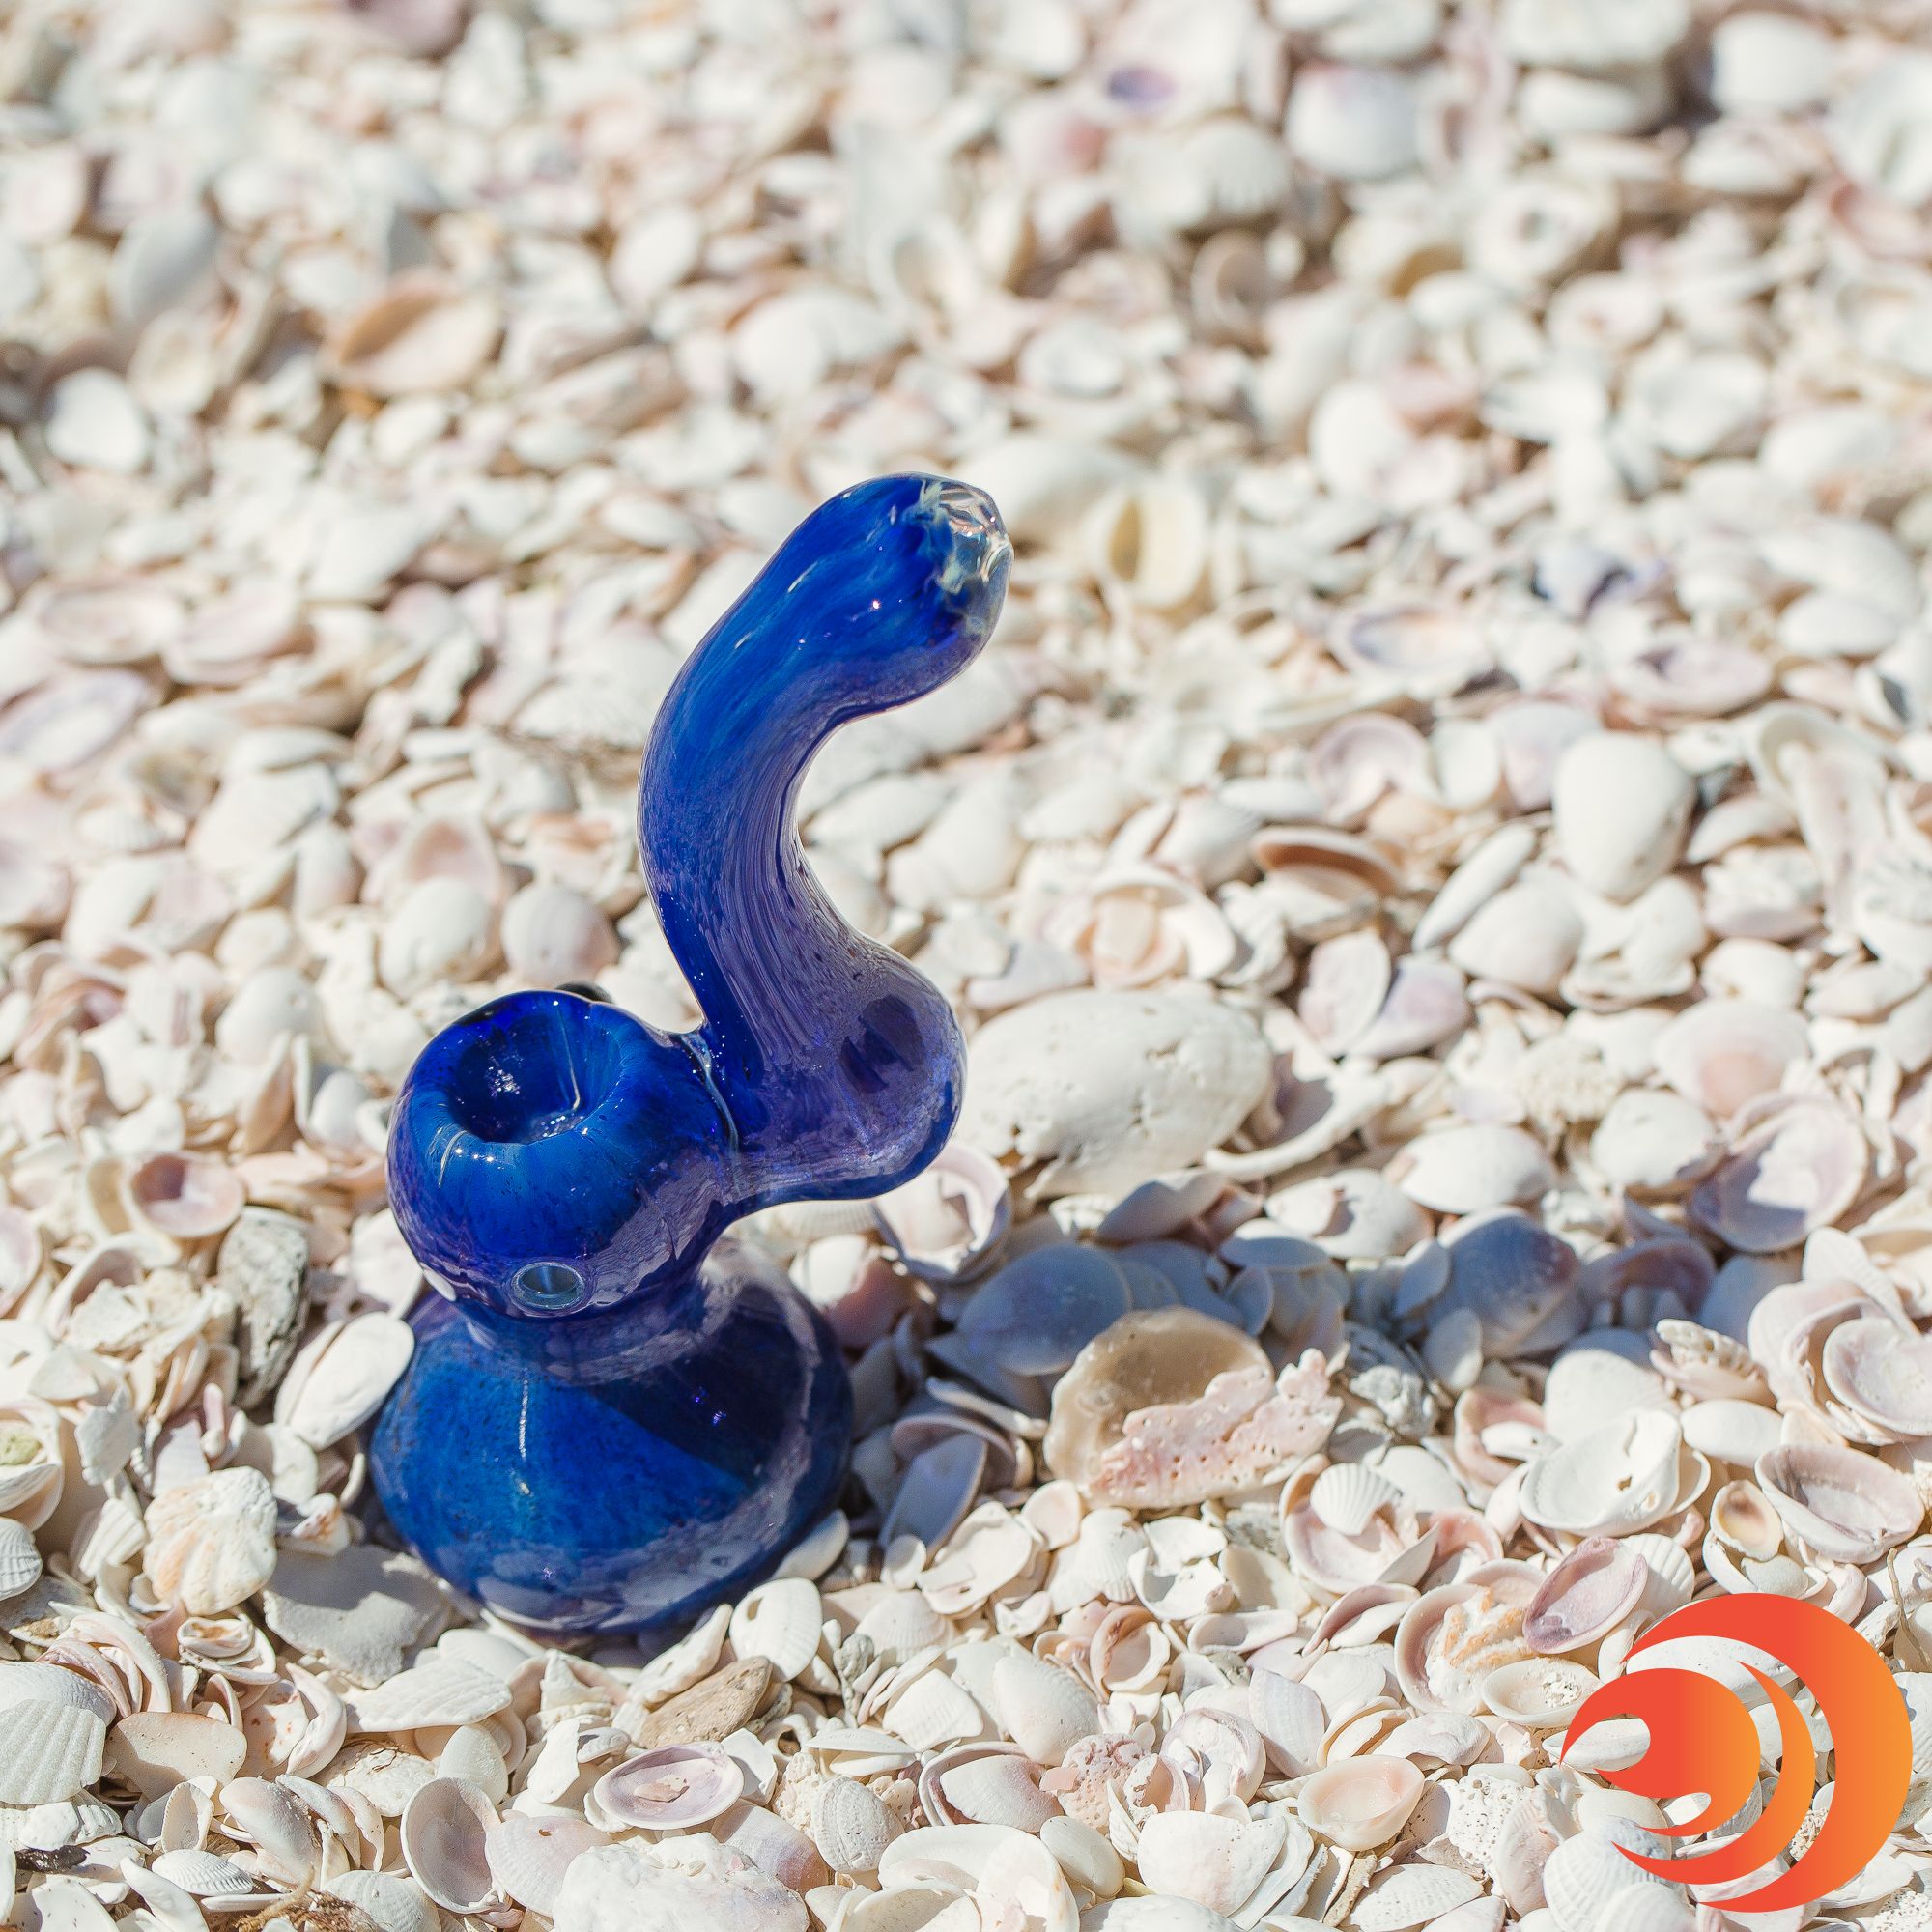 Buy a colorful bubbler for your leftover roaches.